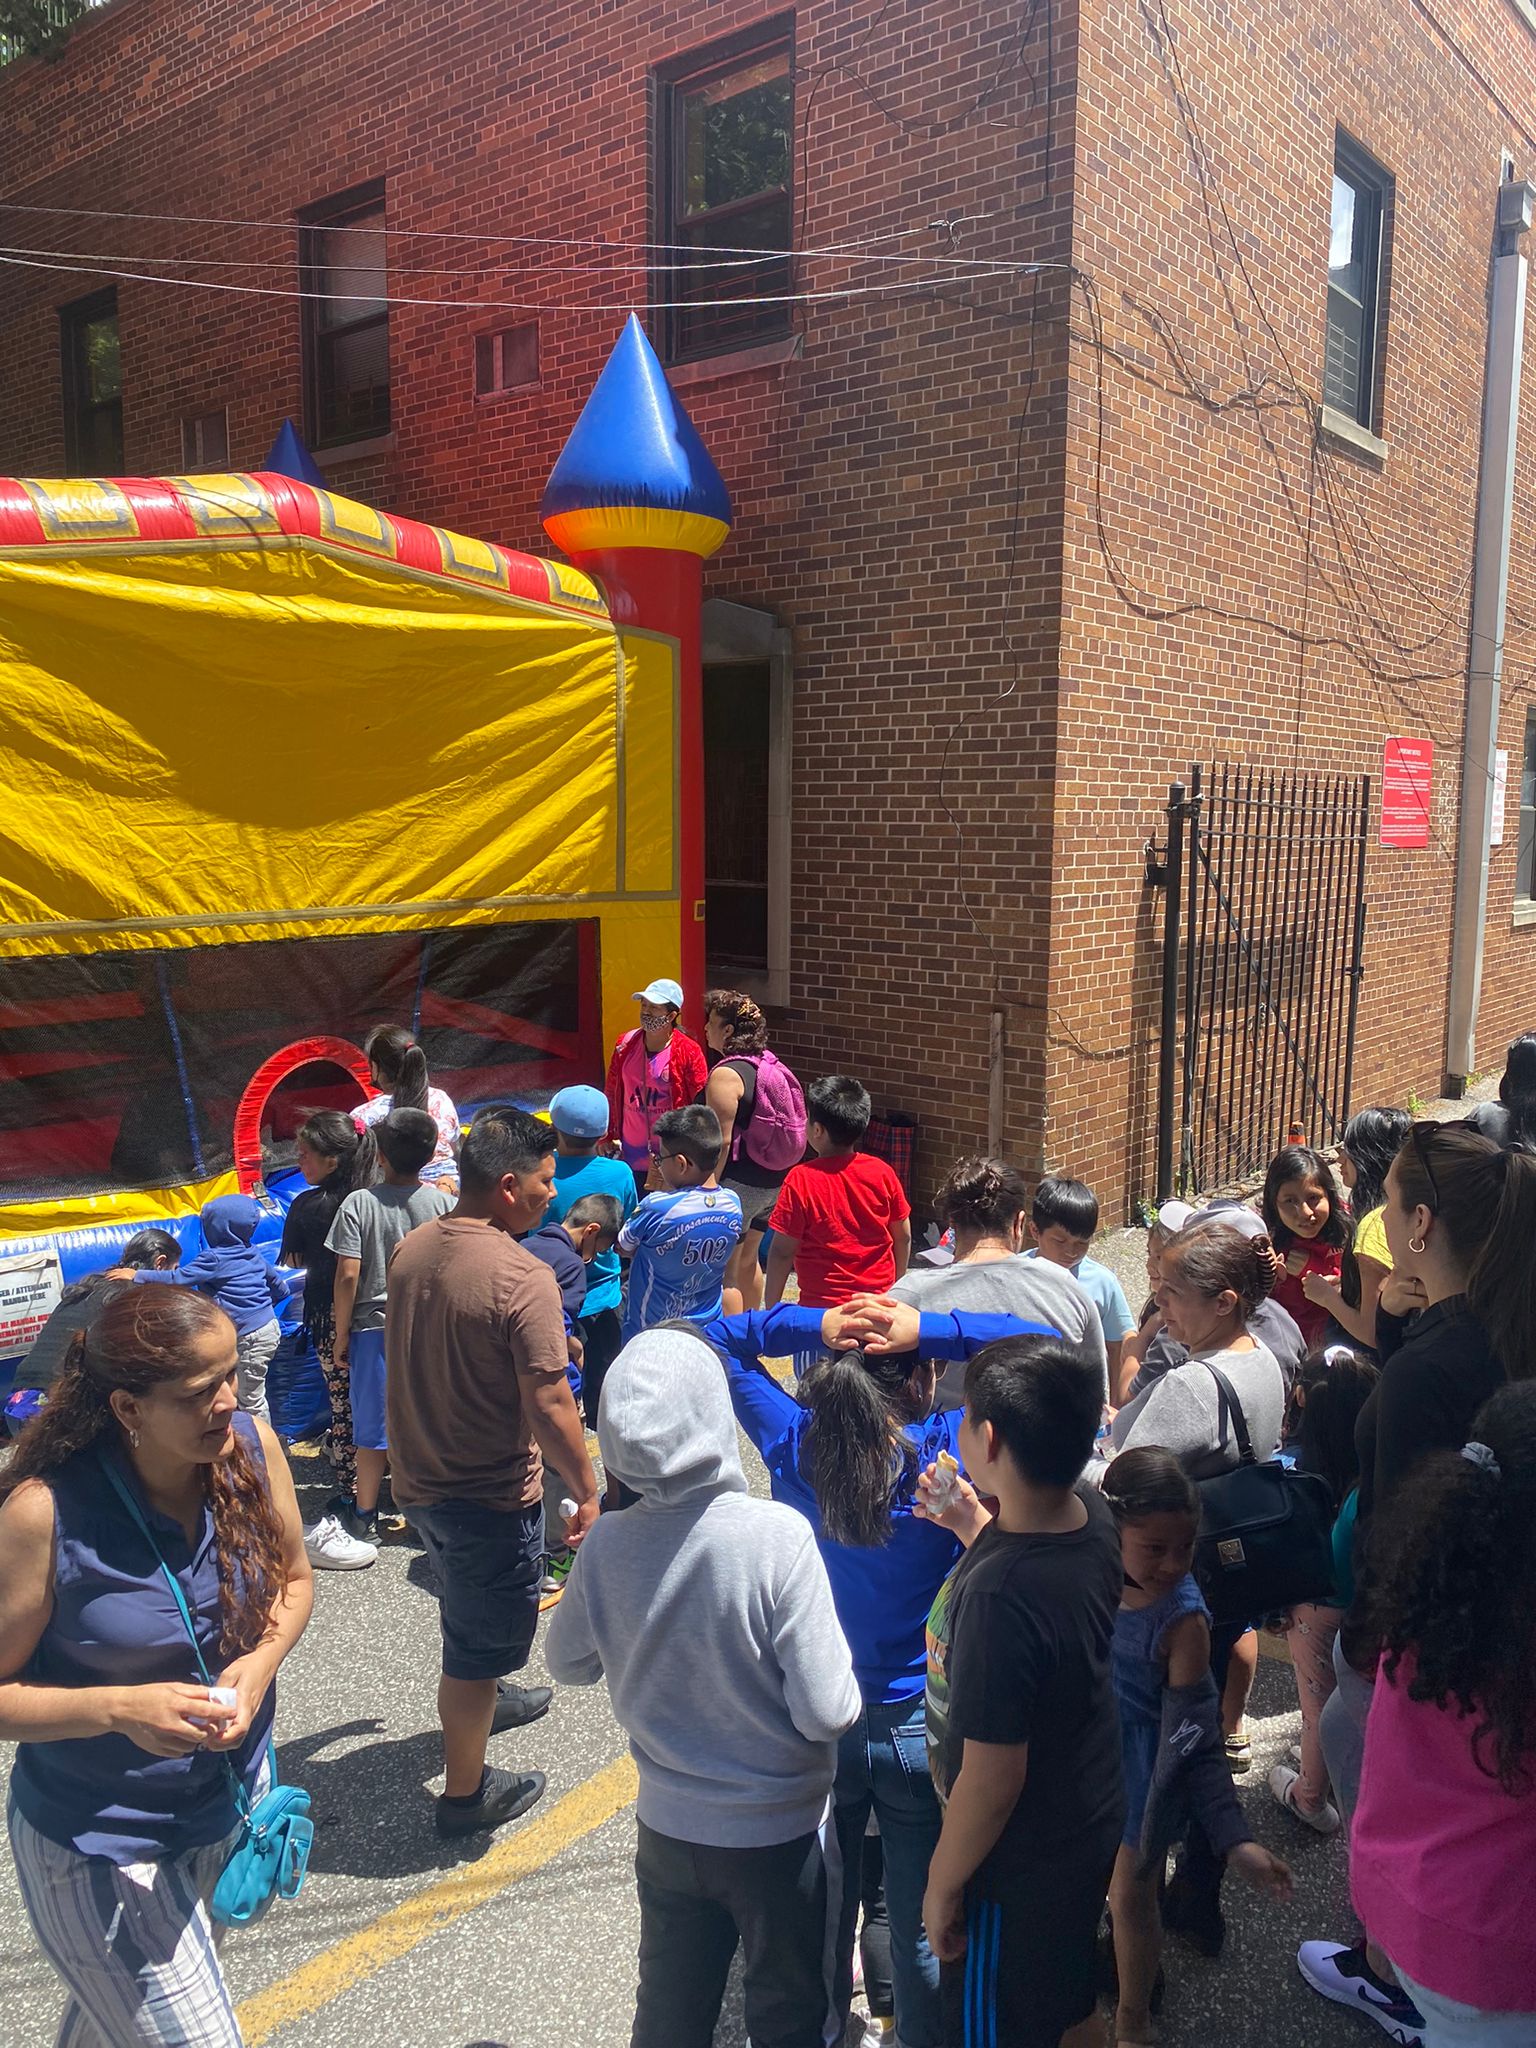 A crowd of people standing around an inflatable castle.